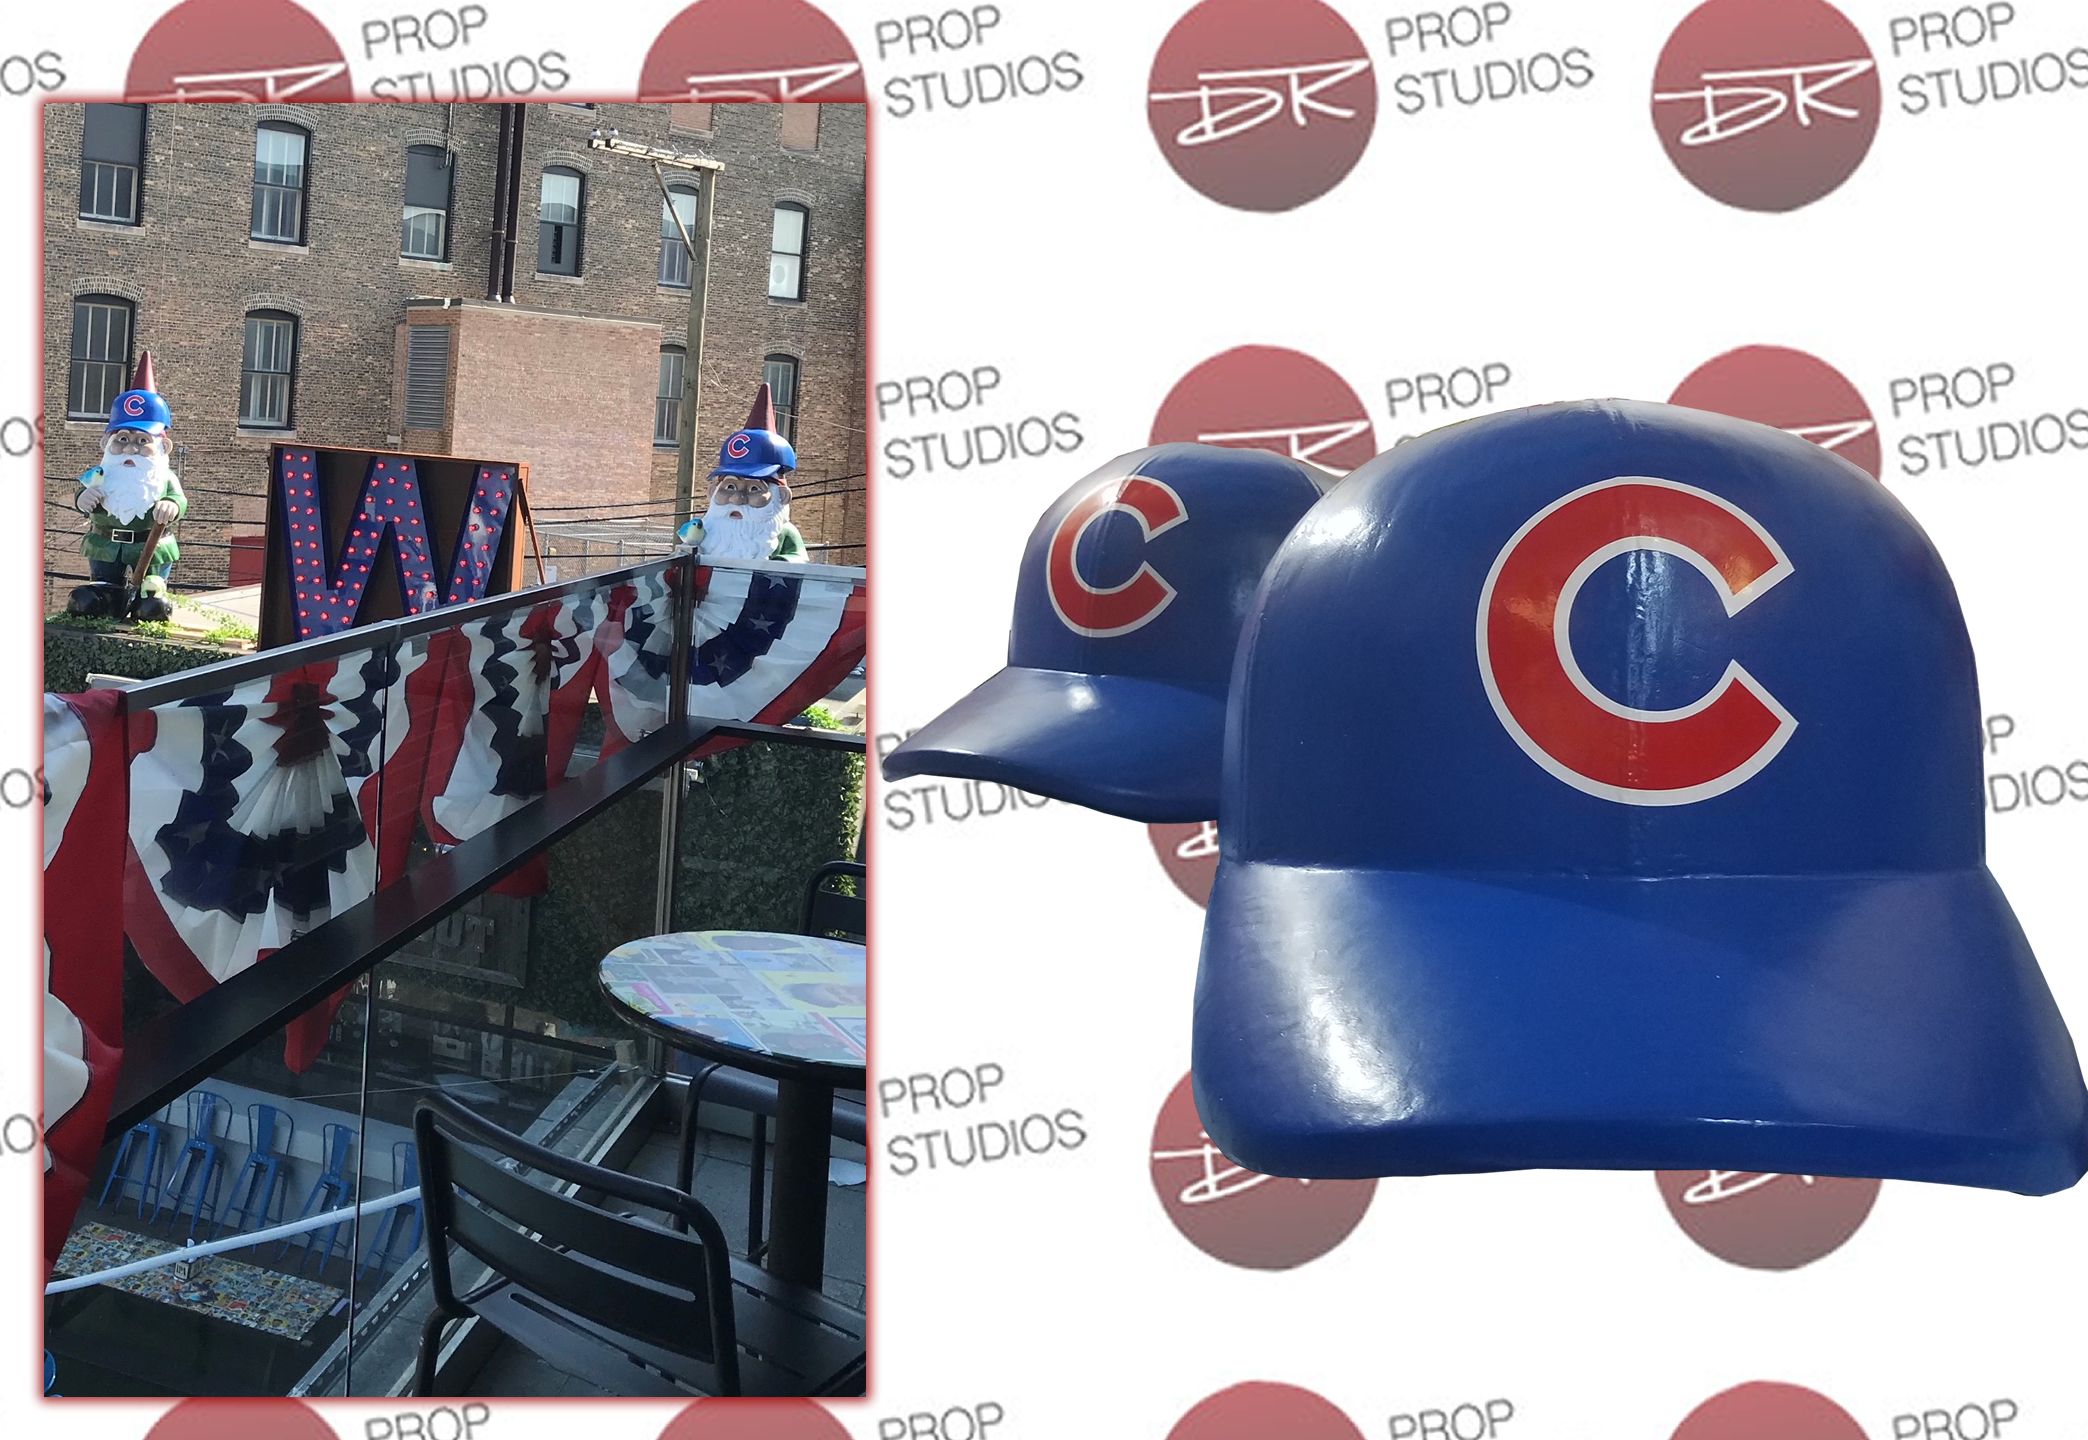 Large Scenic Baseball Caps on Gnome for Restaurant Display Prop